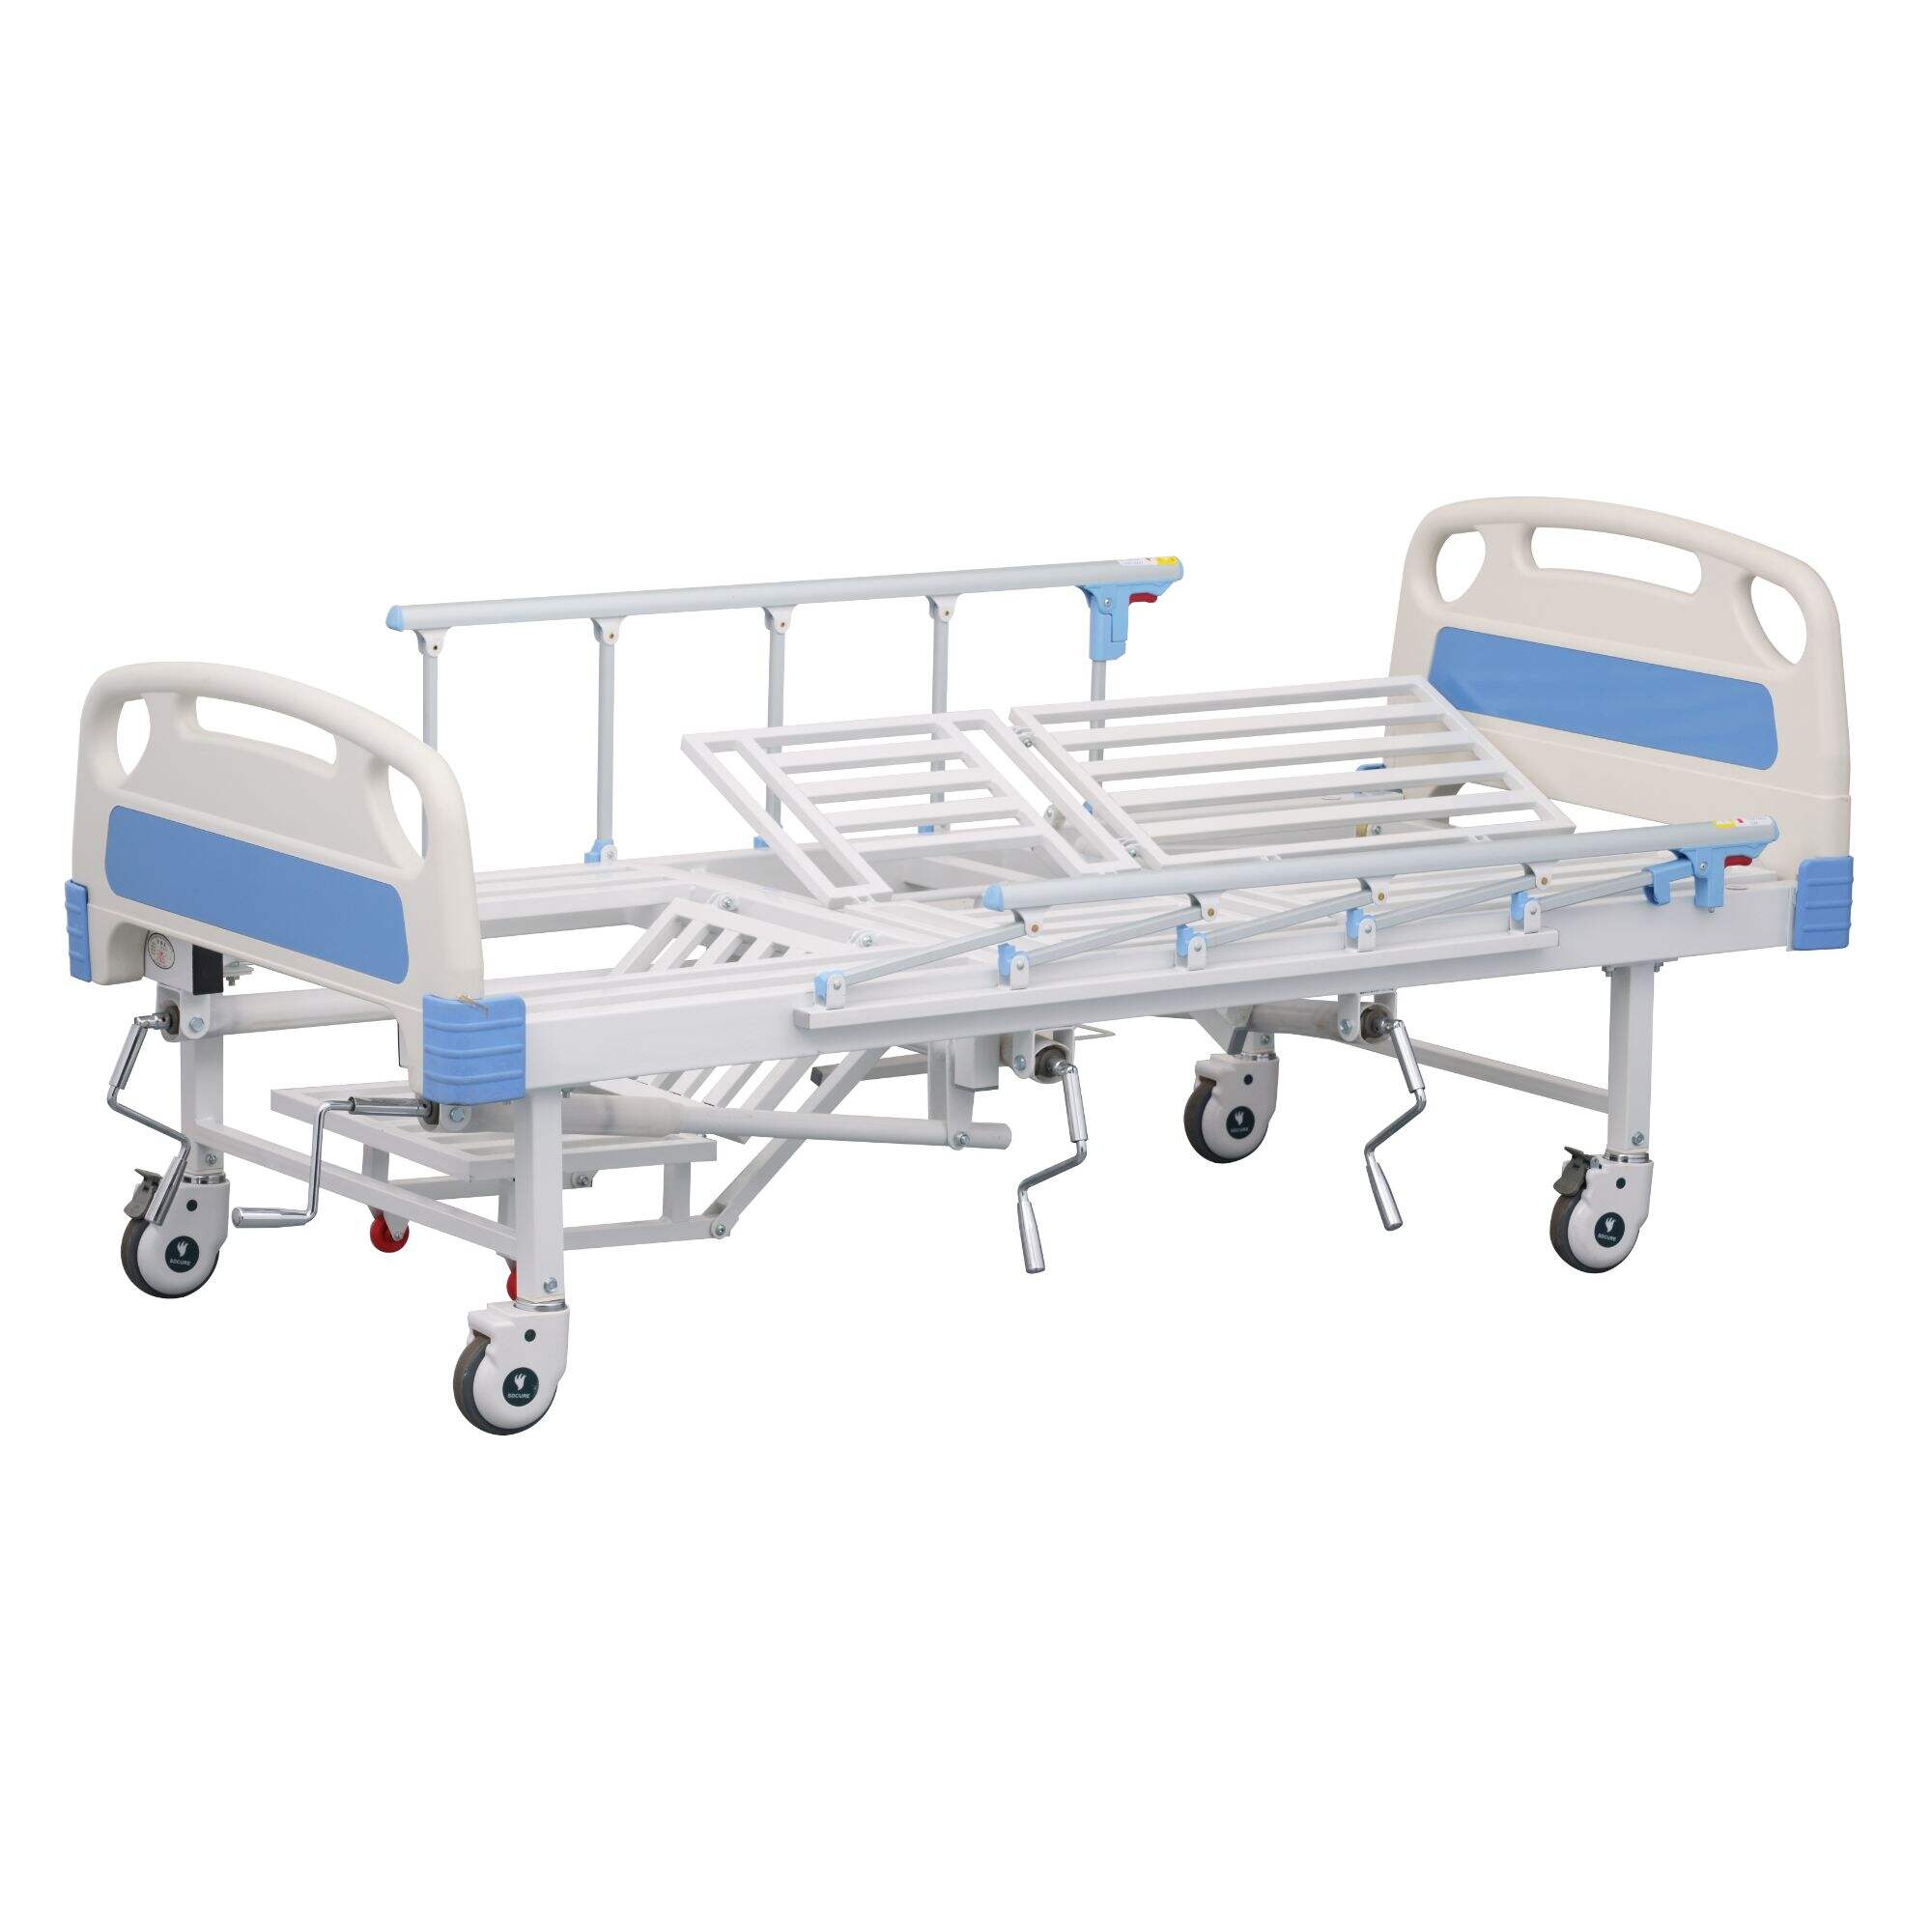 YFC401K-C2 Manual Home Care Turn-over Bed with Bedpan